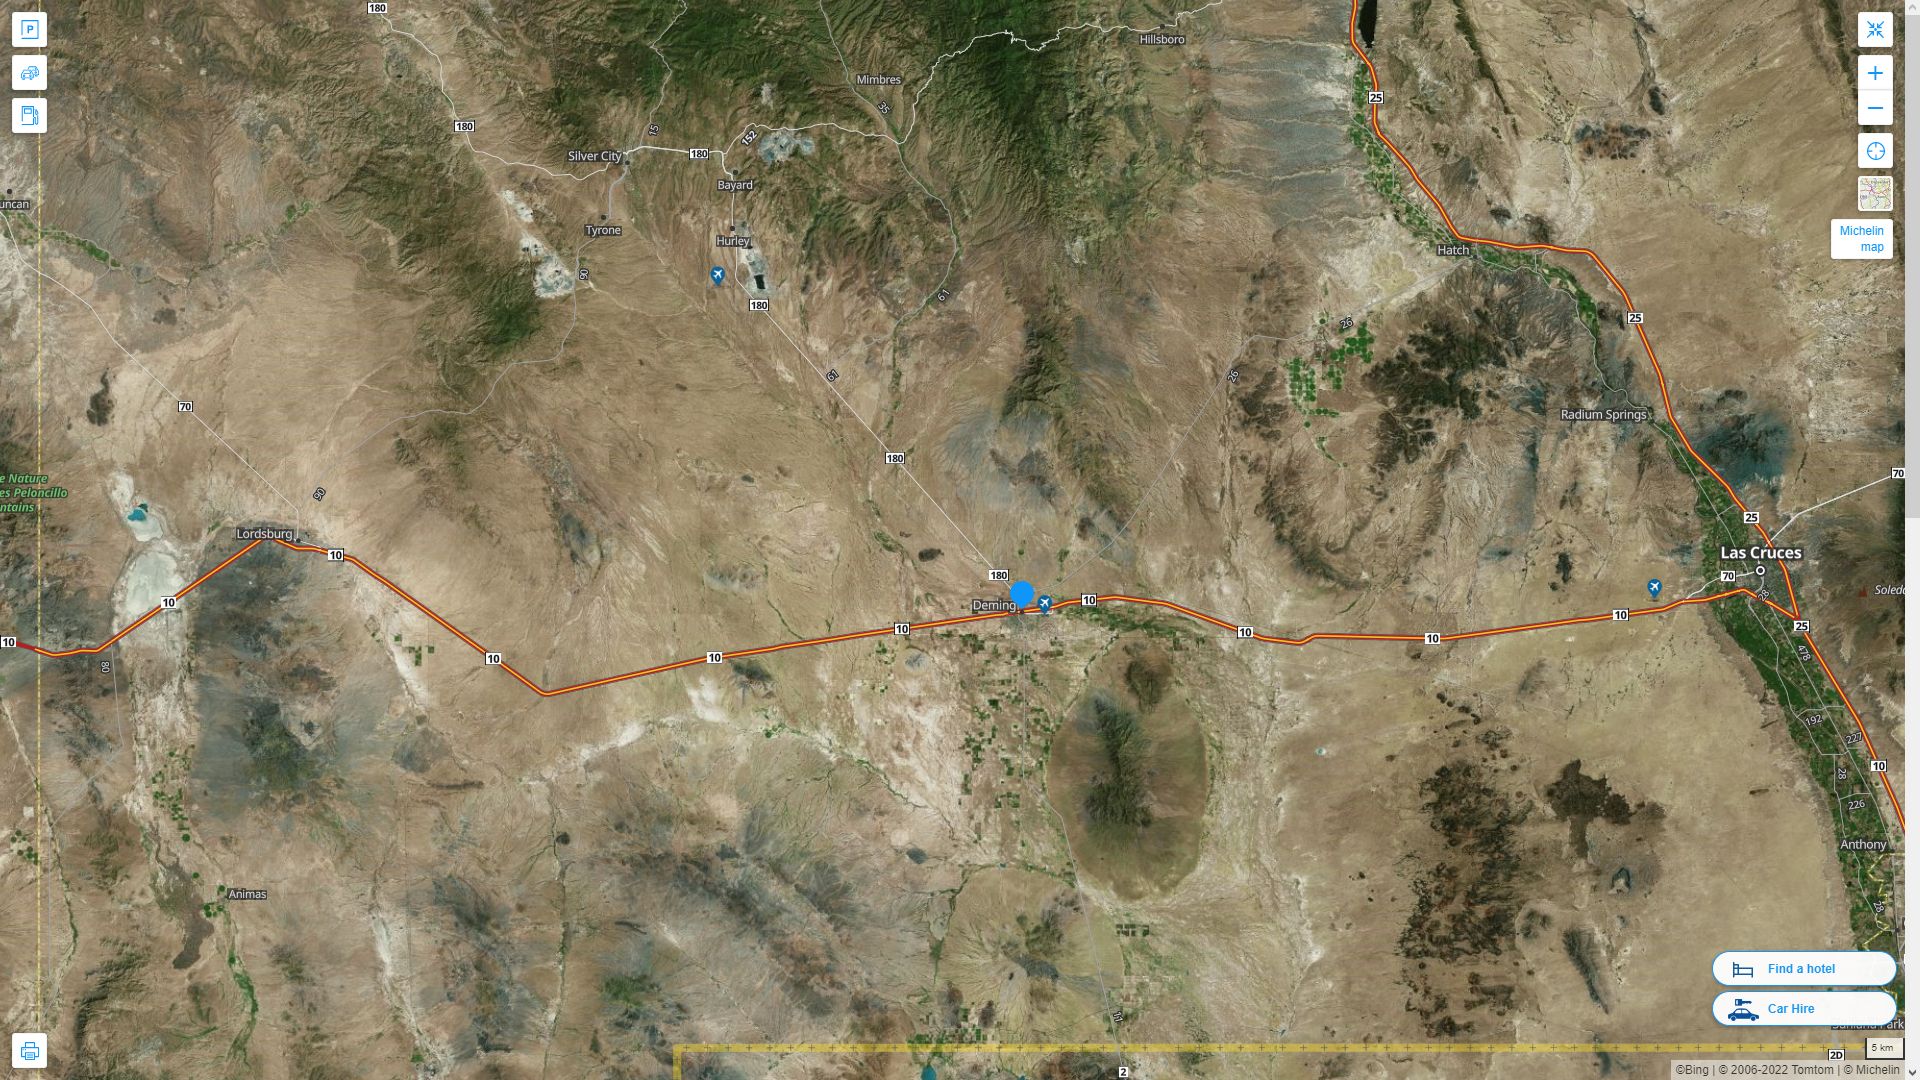 Deming New Mexico Highway and Road Map with Satellite View